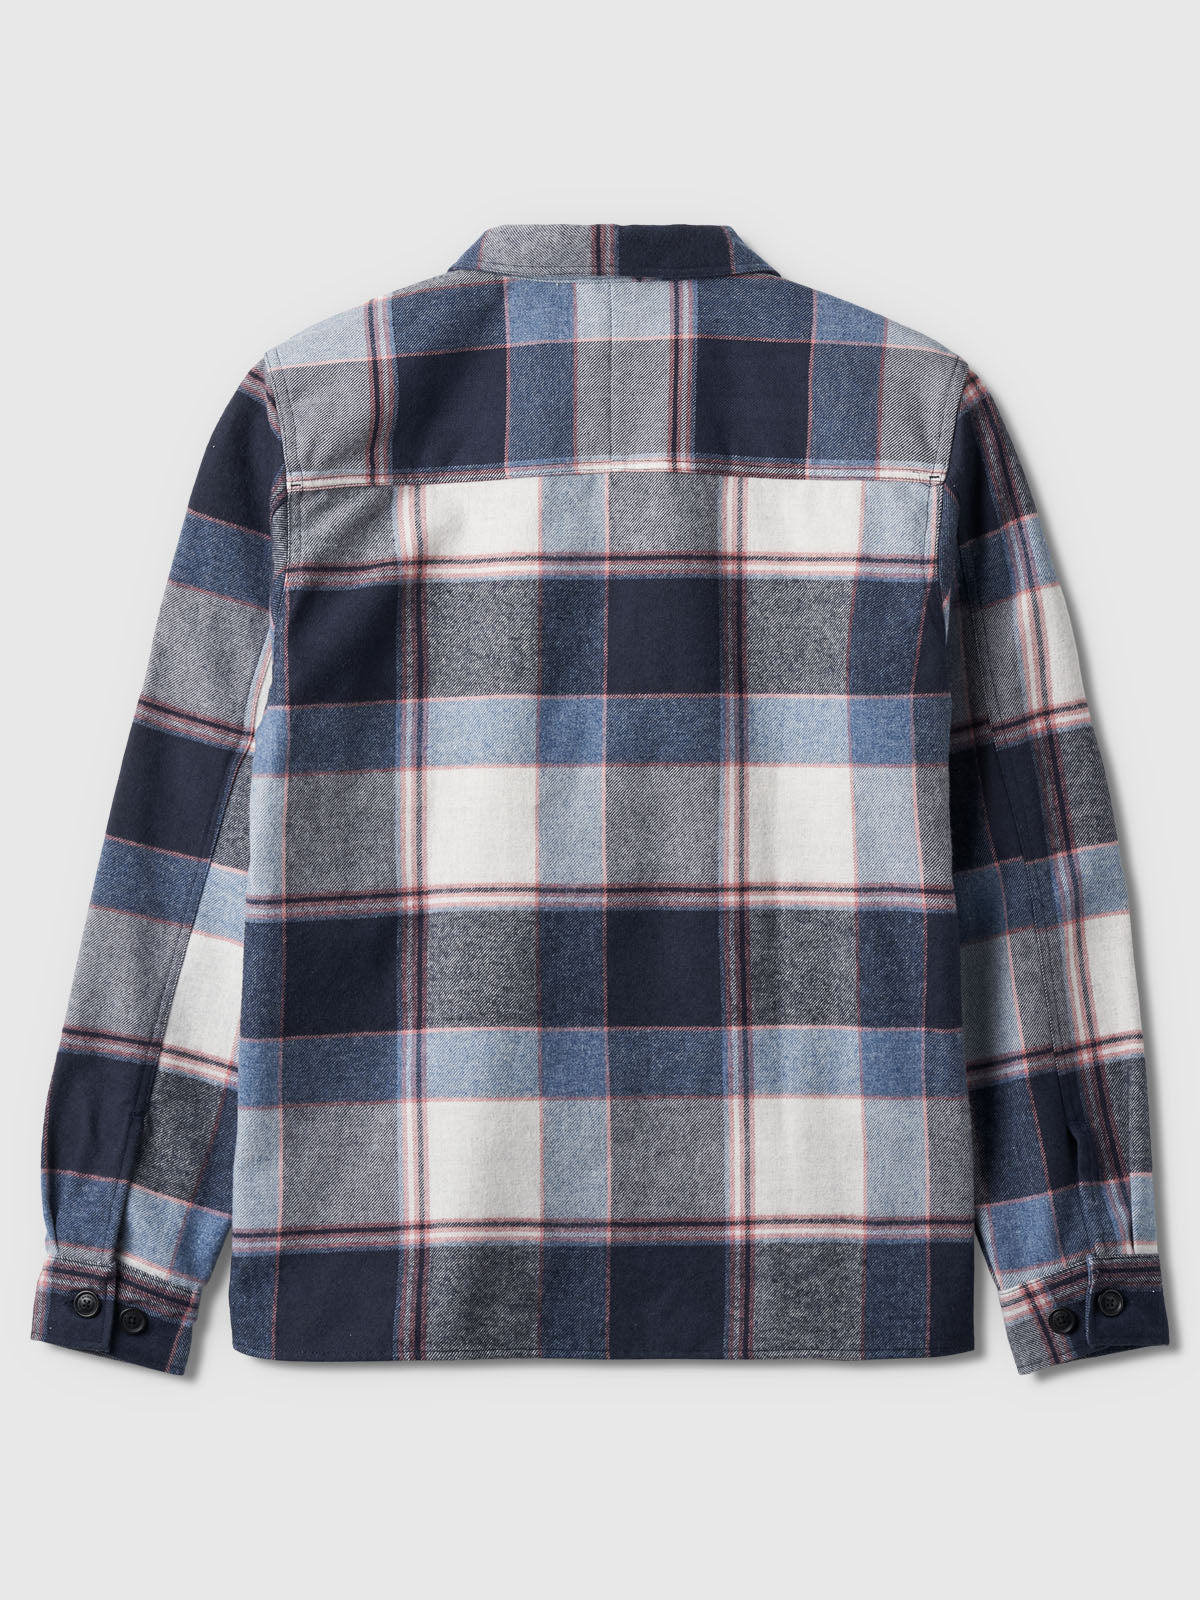 Clipper Big Ny Check - Navy Check - The Sons online